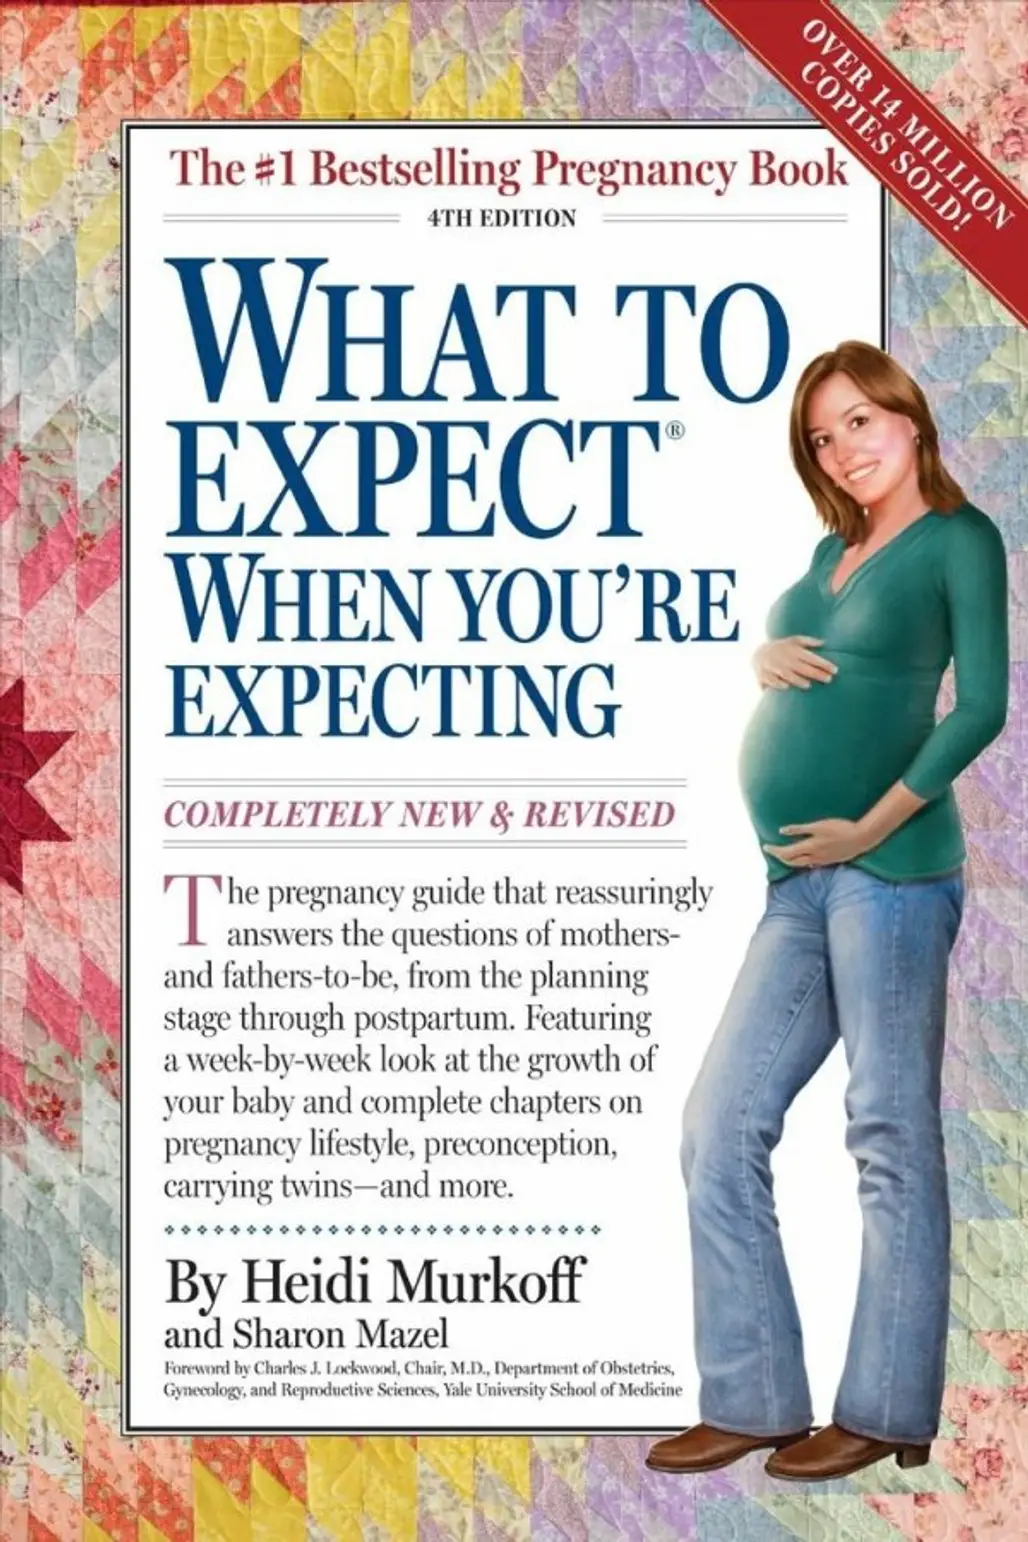 “What to Expect when You’re Expecting”